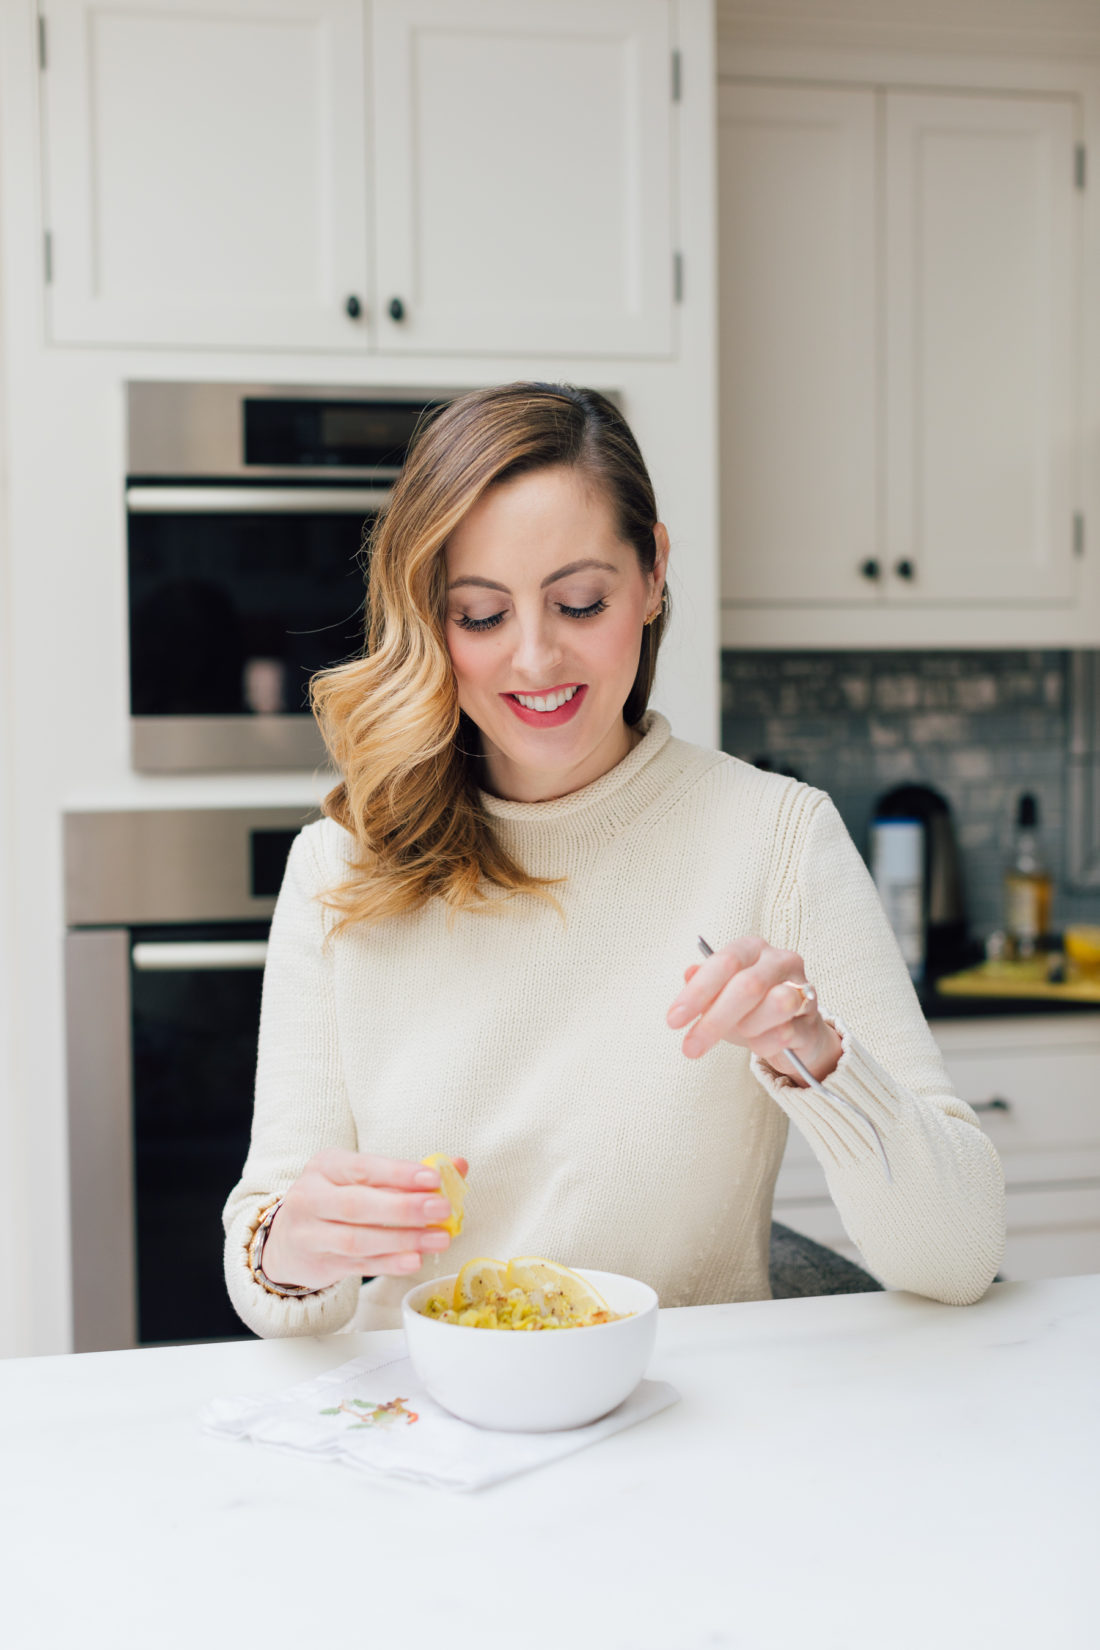 Eva Amurri Martino enjoys her Brussels Sprouts side dish with a squeeze of lemon